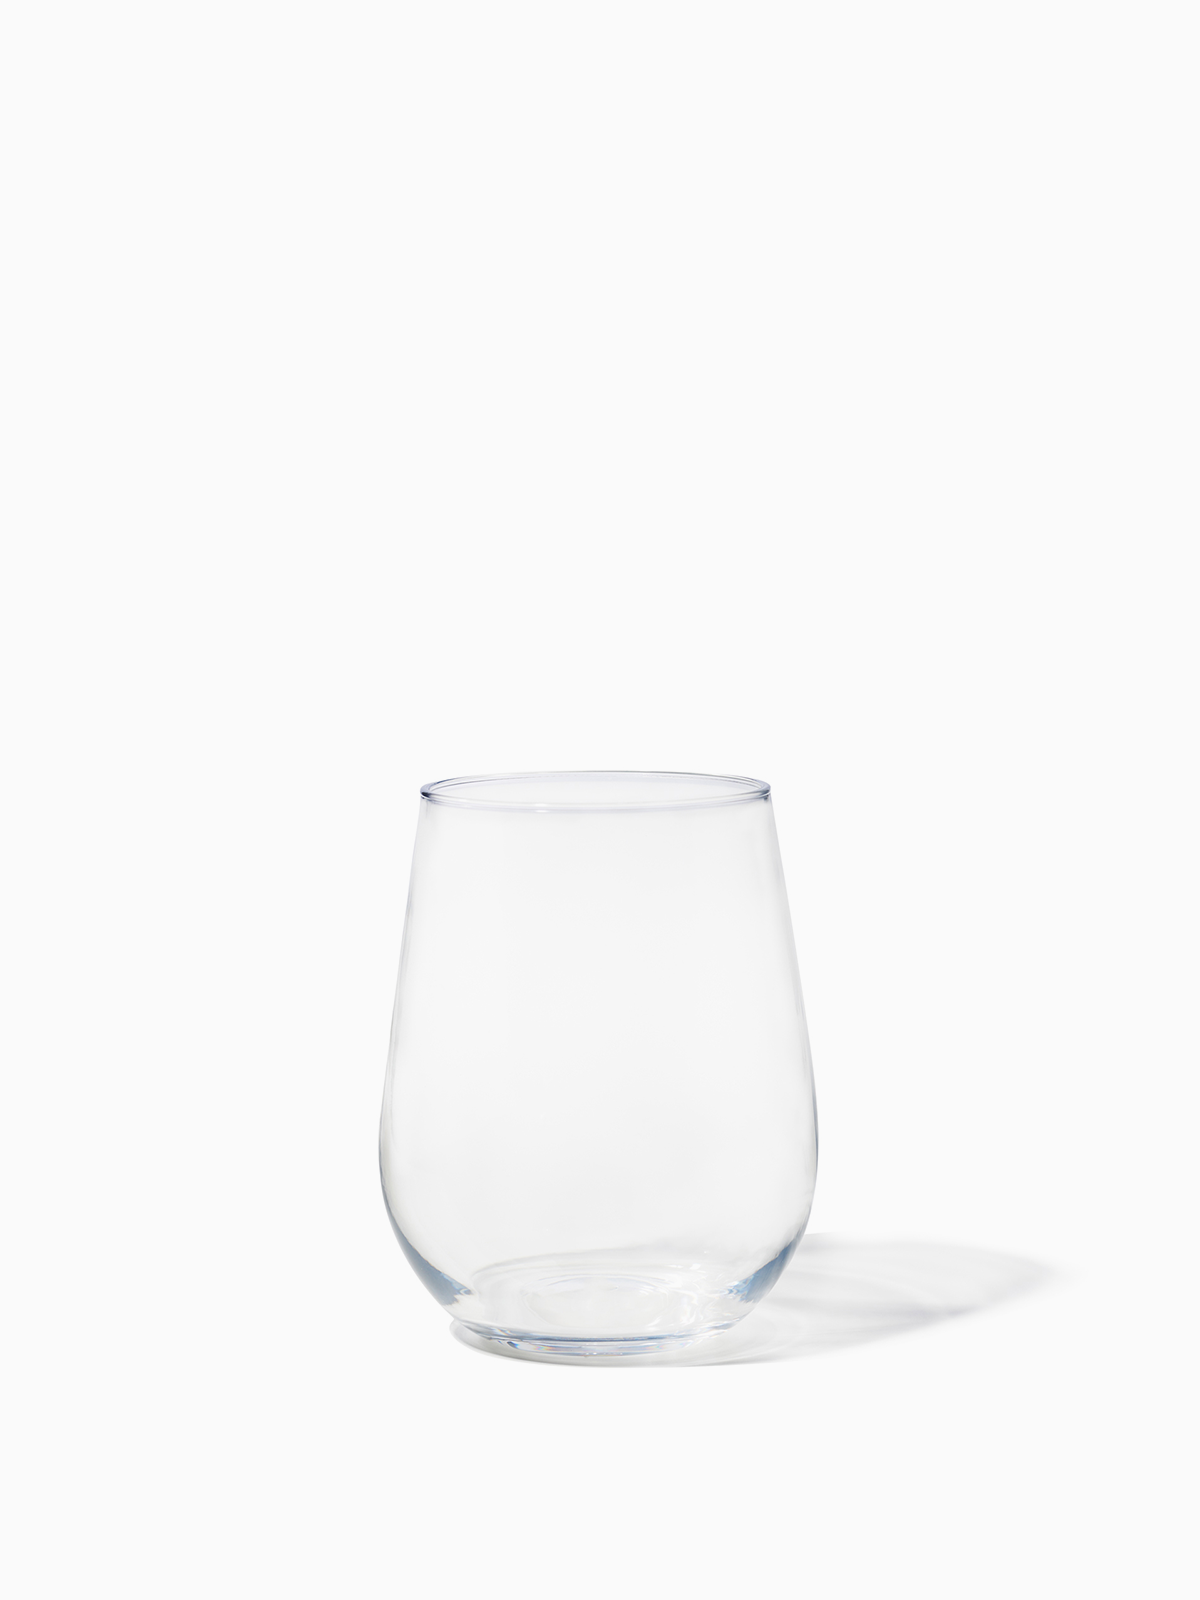 Personalized Tritan Acrylic Stemless Wine Glass Set - Nautical Collection